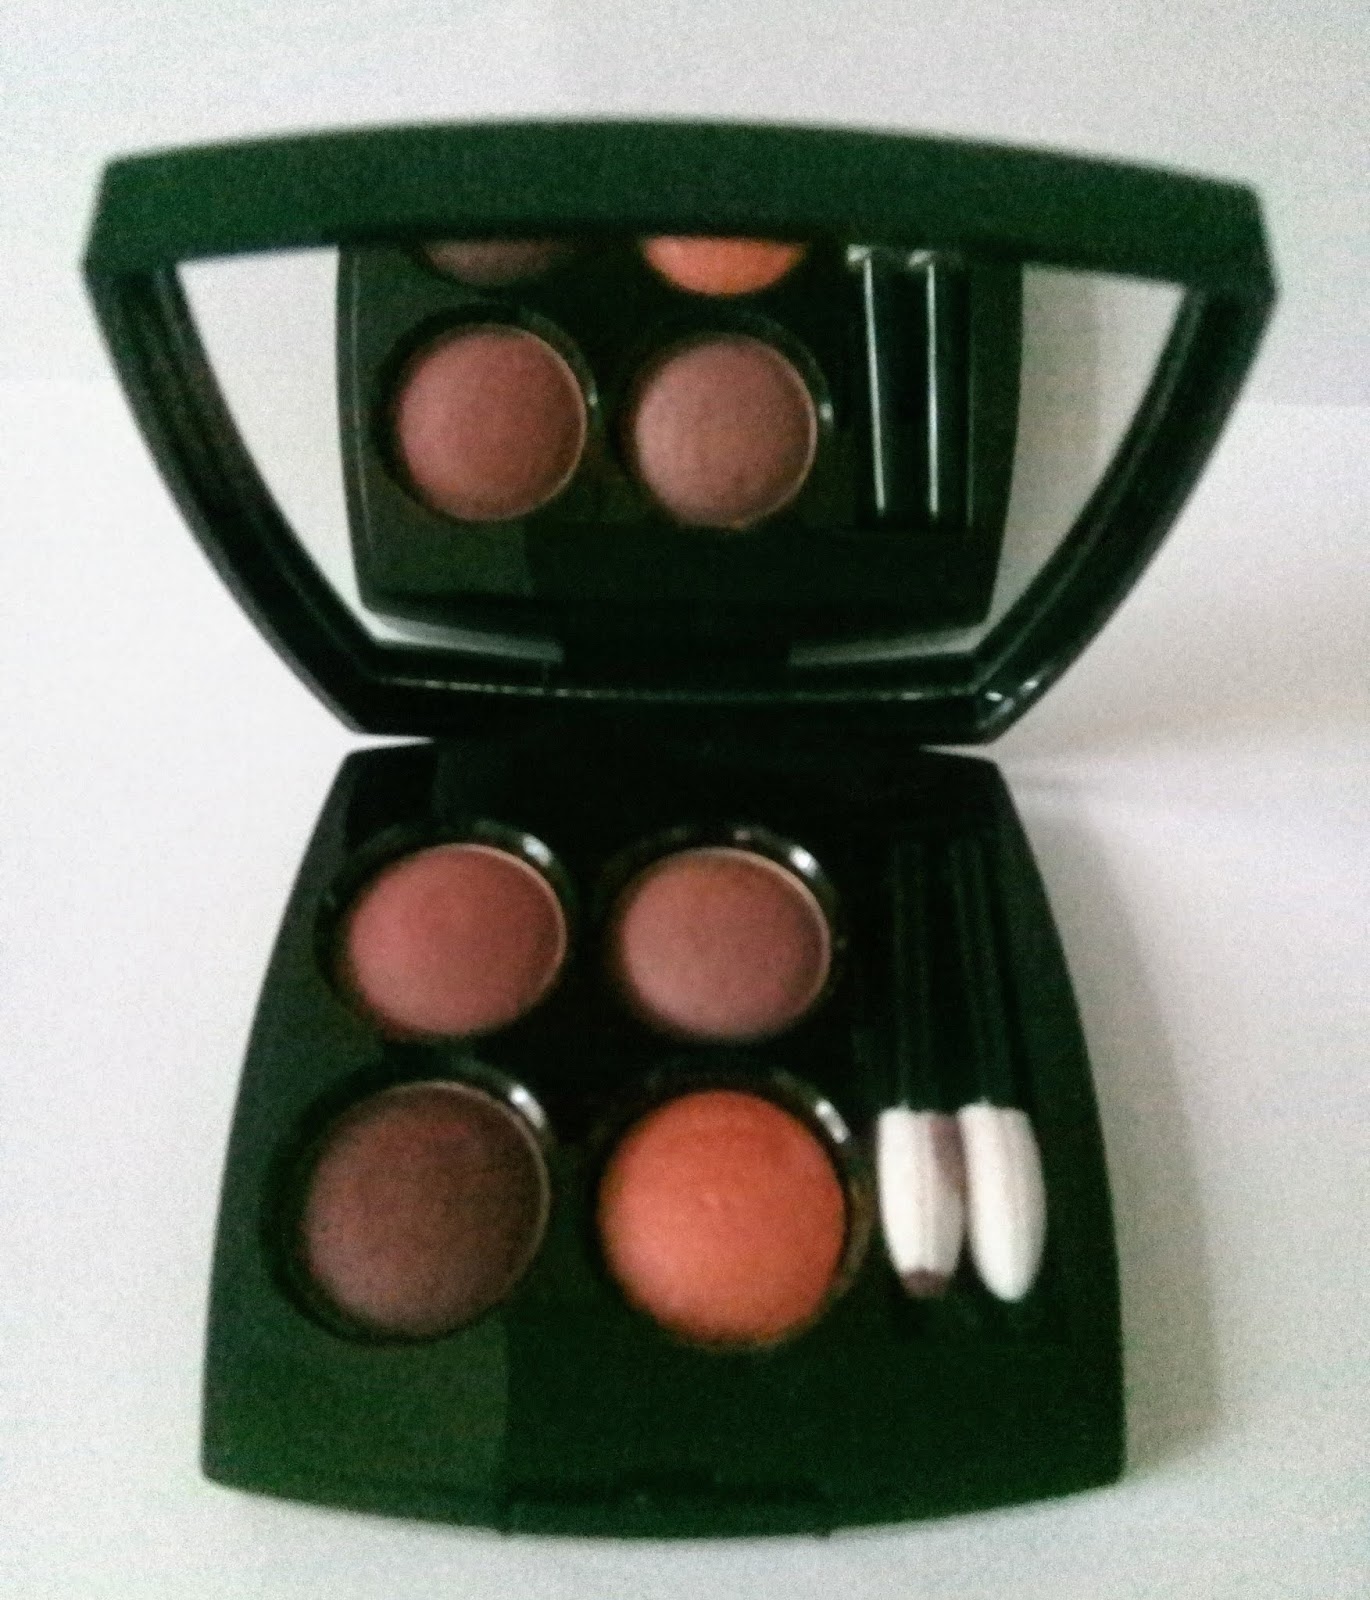 CHANEL, Makeup, Chanel Eyeshadow Les 4 Ombres 354 Warm Memories